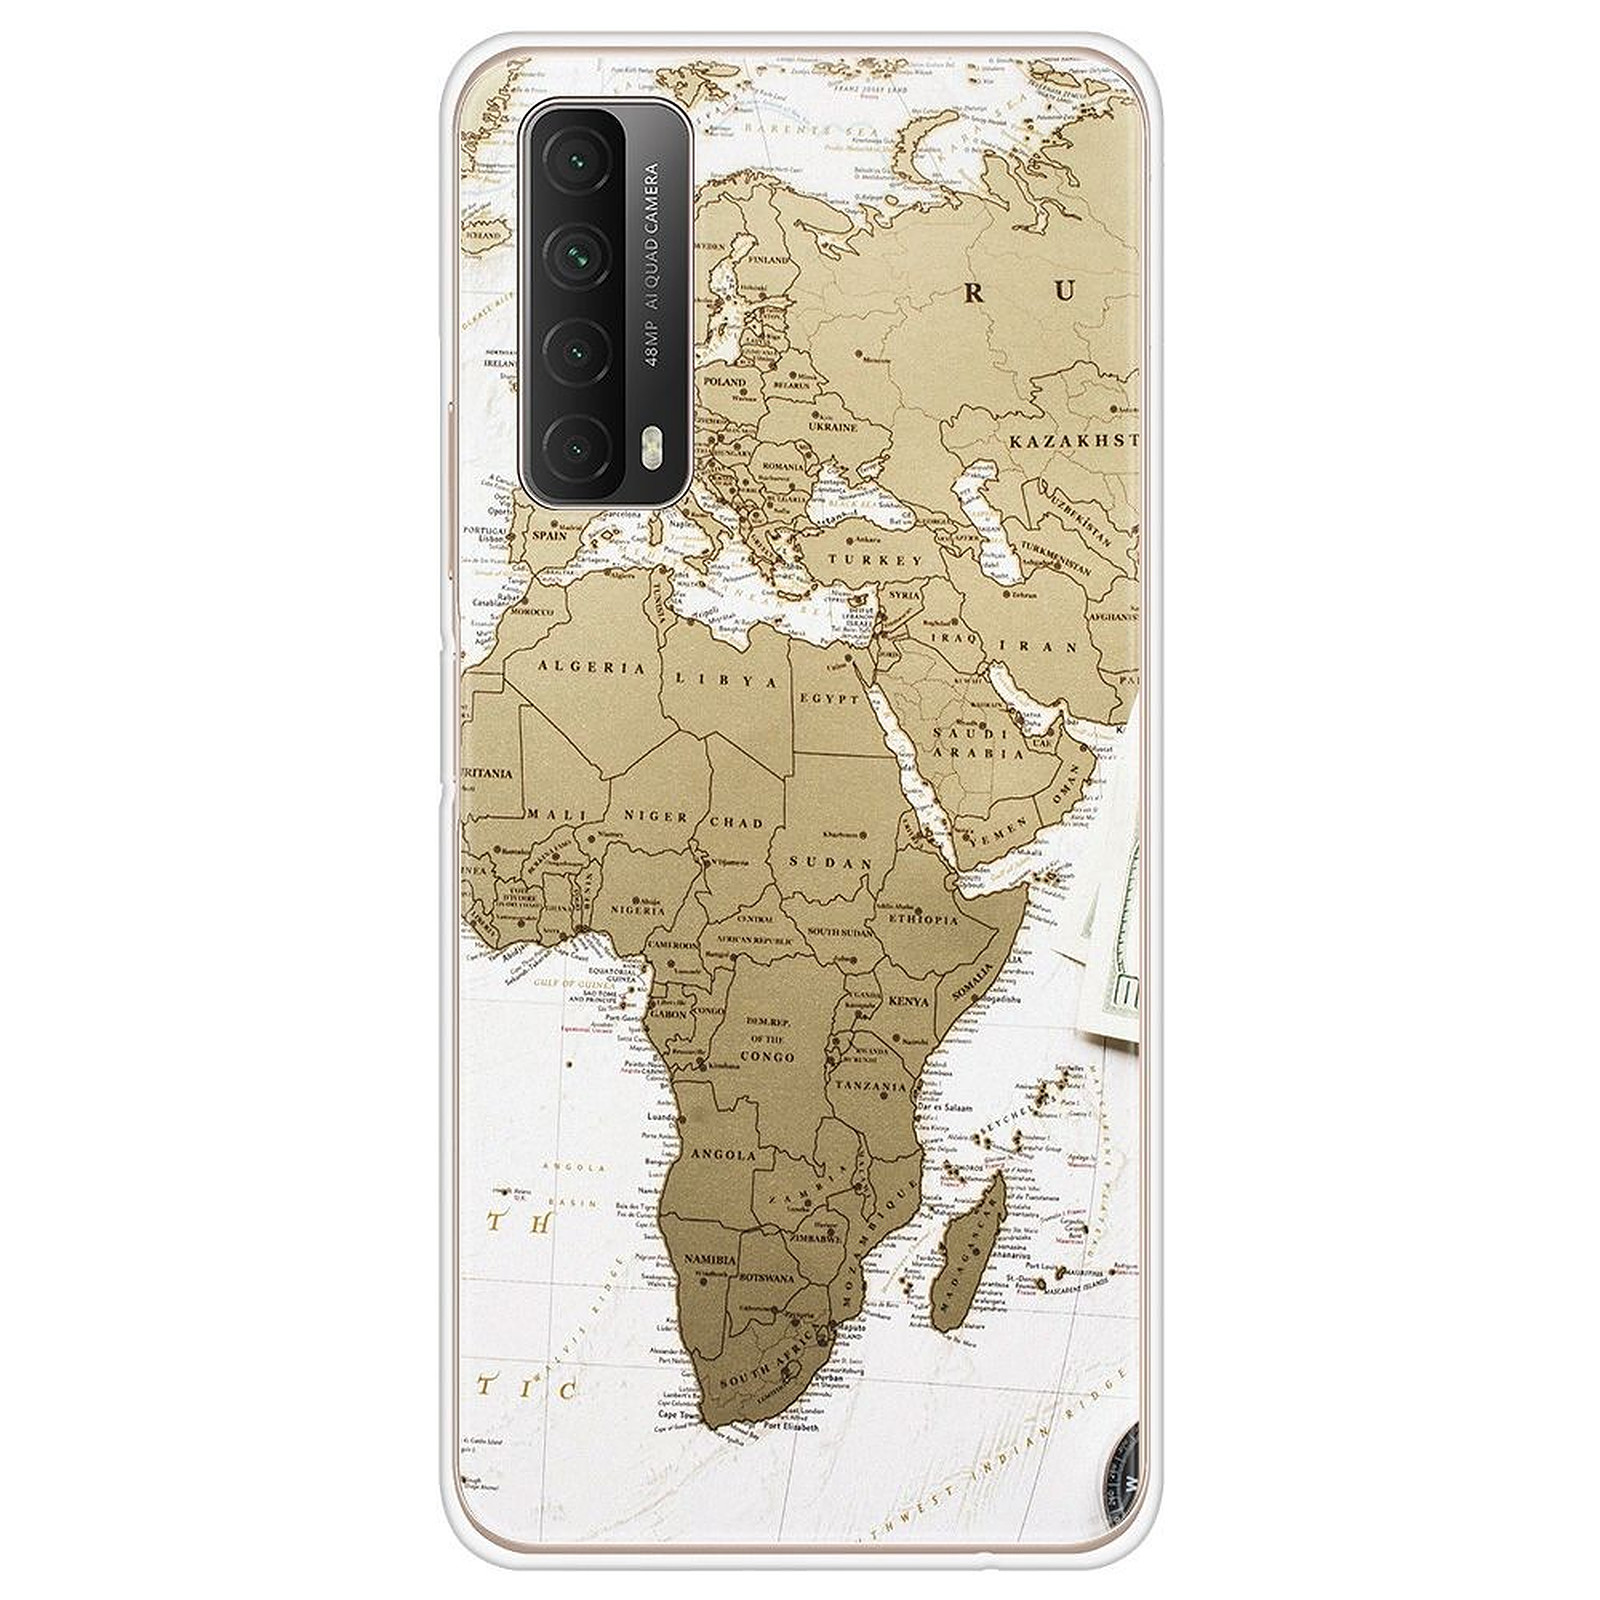 1001 Coques Coque silicone gel Huawei P Smart 2021 motif Map Europe Afrique - Coque telephone 1001Coques